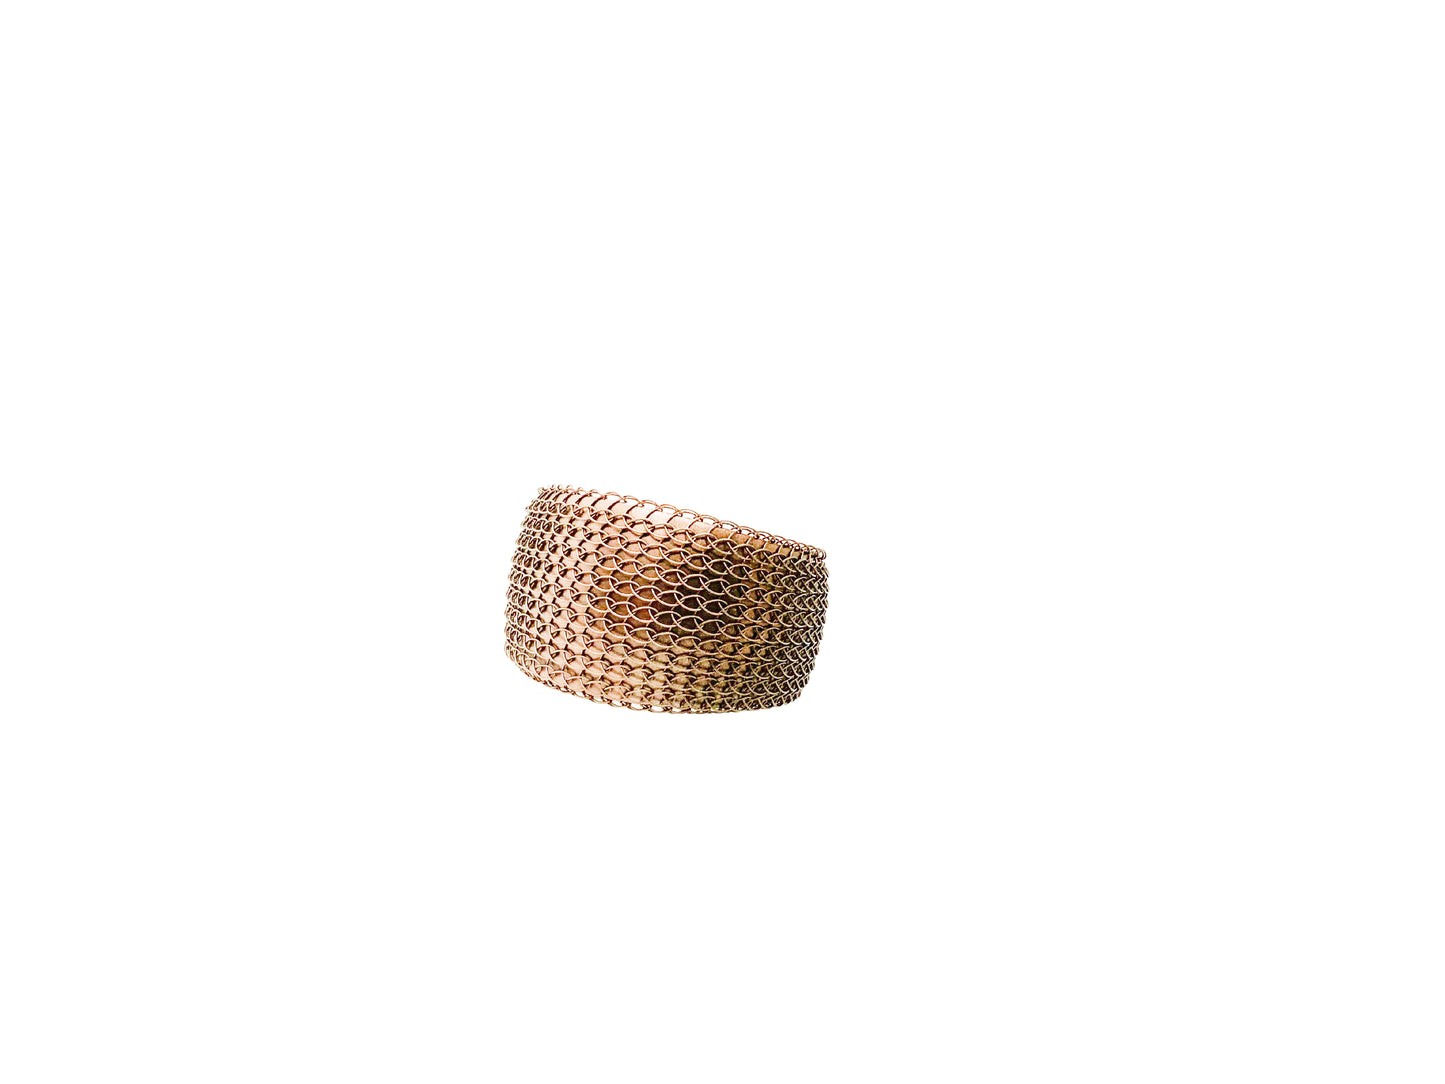 Tapered Cuff Covered with Open Knit Wire